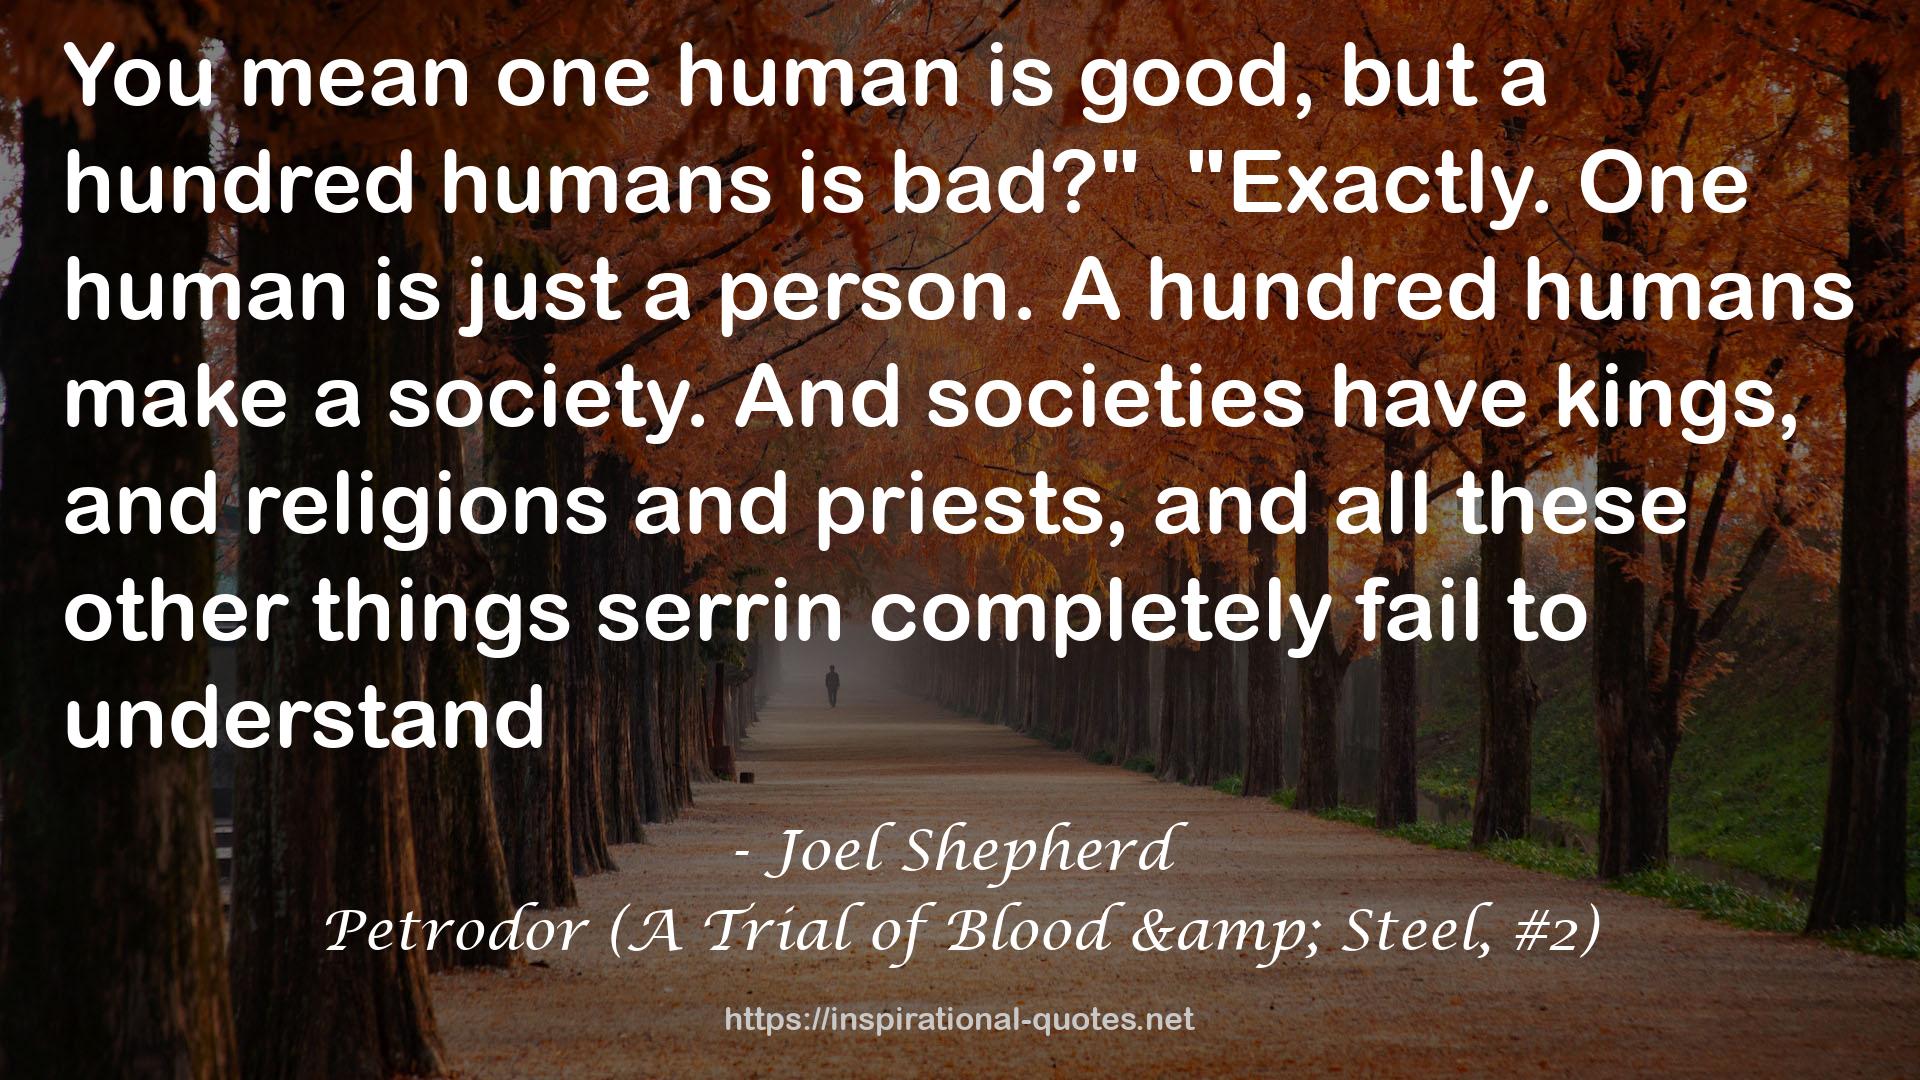 Petrodor (A Trial of Blood & Steel, #2) QUOTES